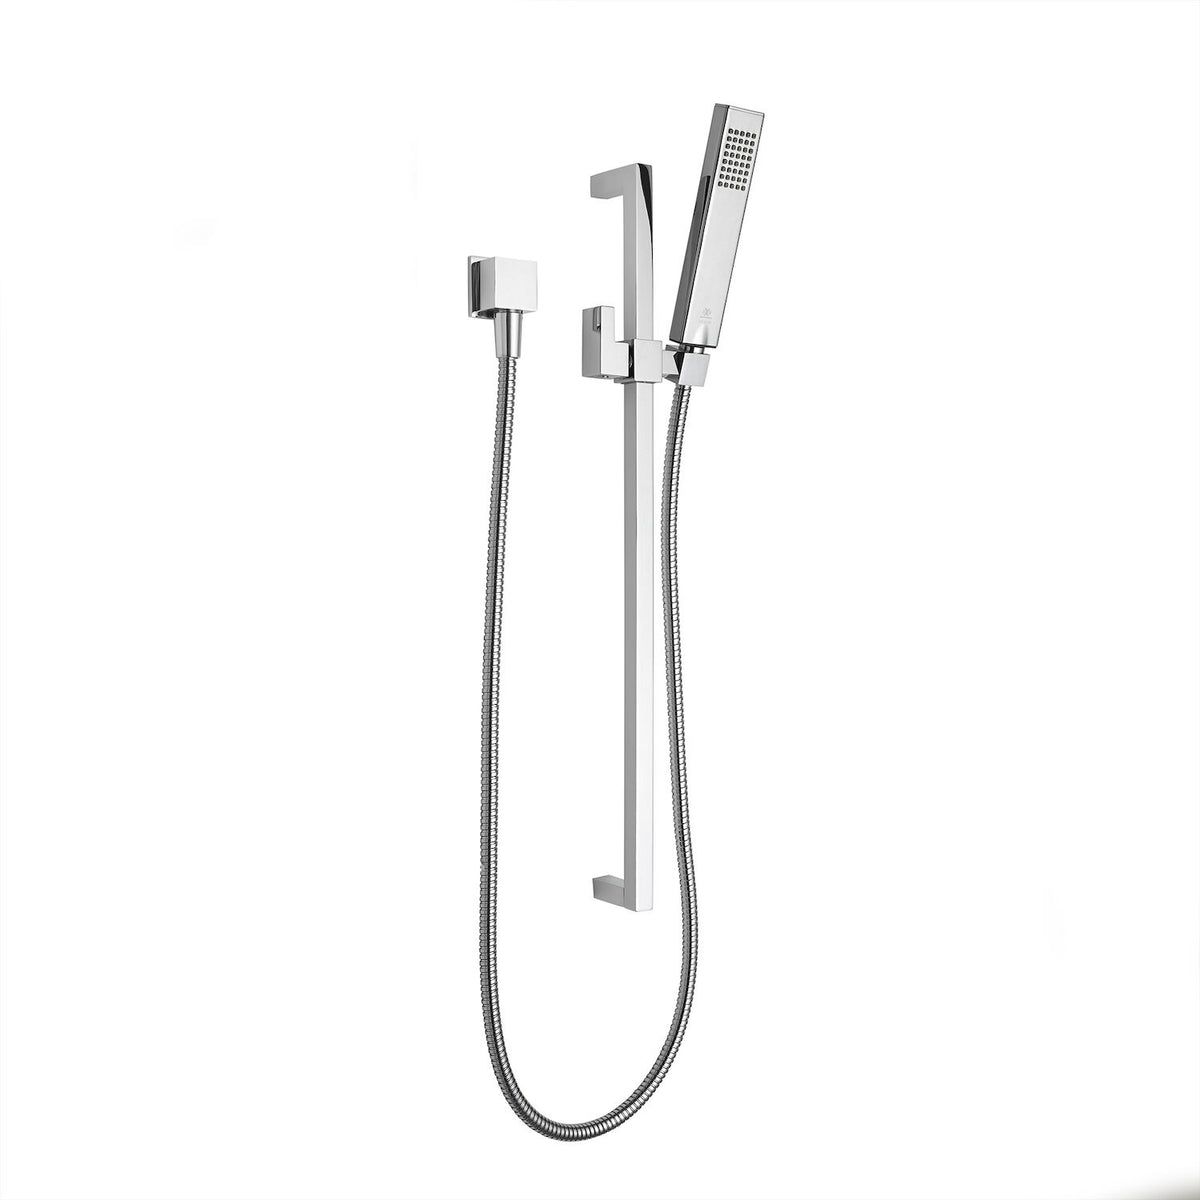 CONTEMPORARY SQUARE PERSONAL HAND SHOWER SET WITH ADJUSTABLE 24-INCH SLIDE BAR